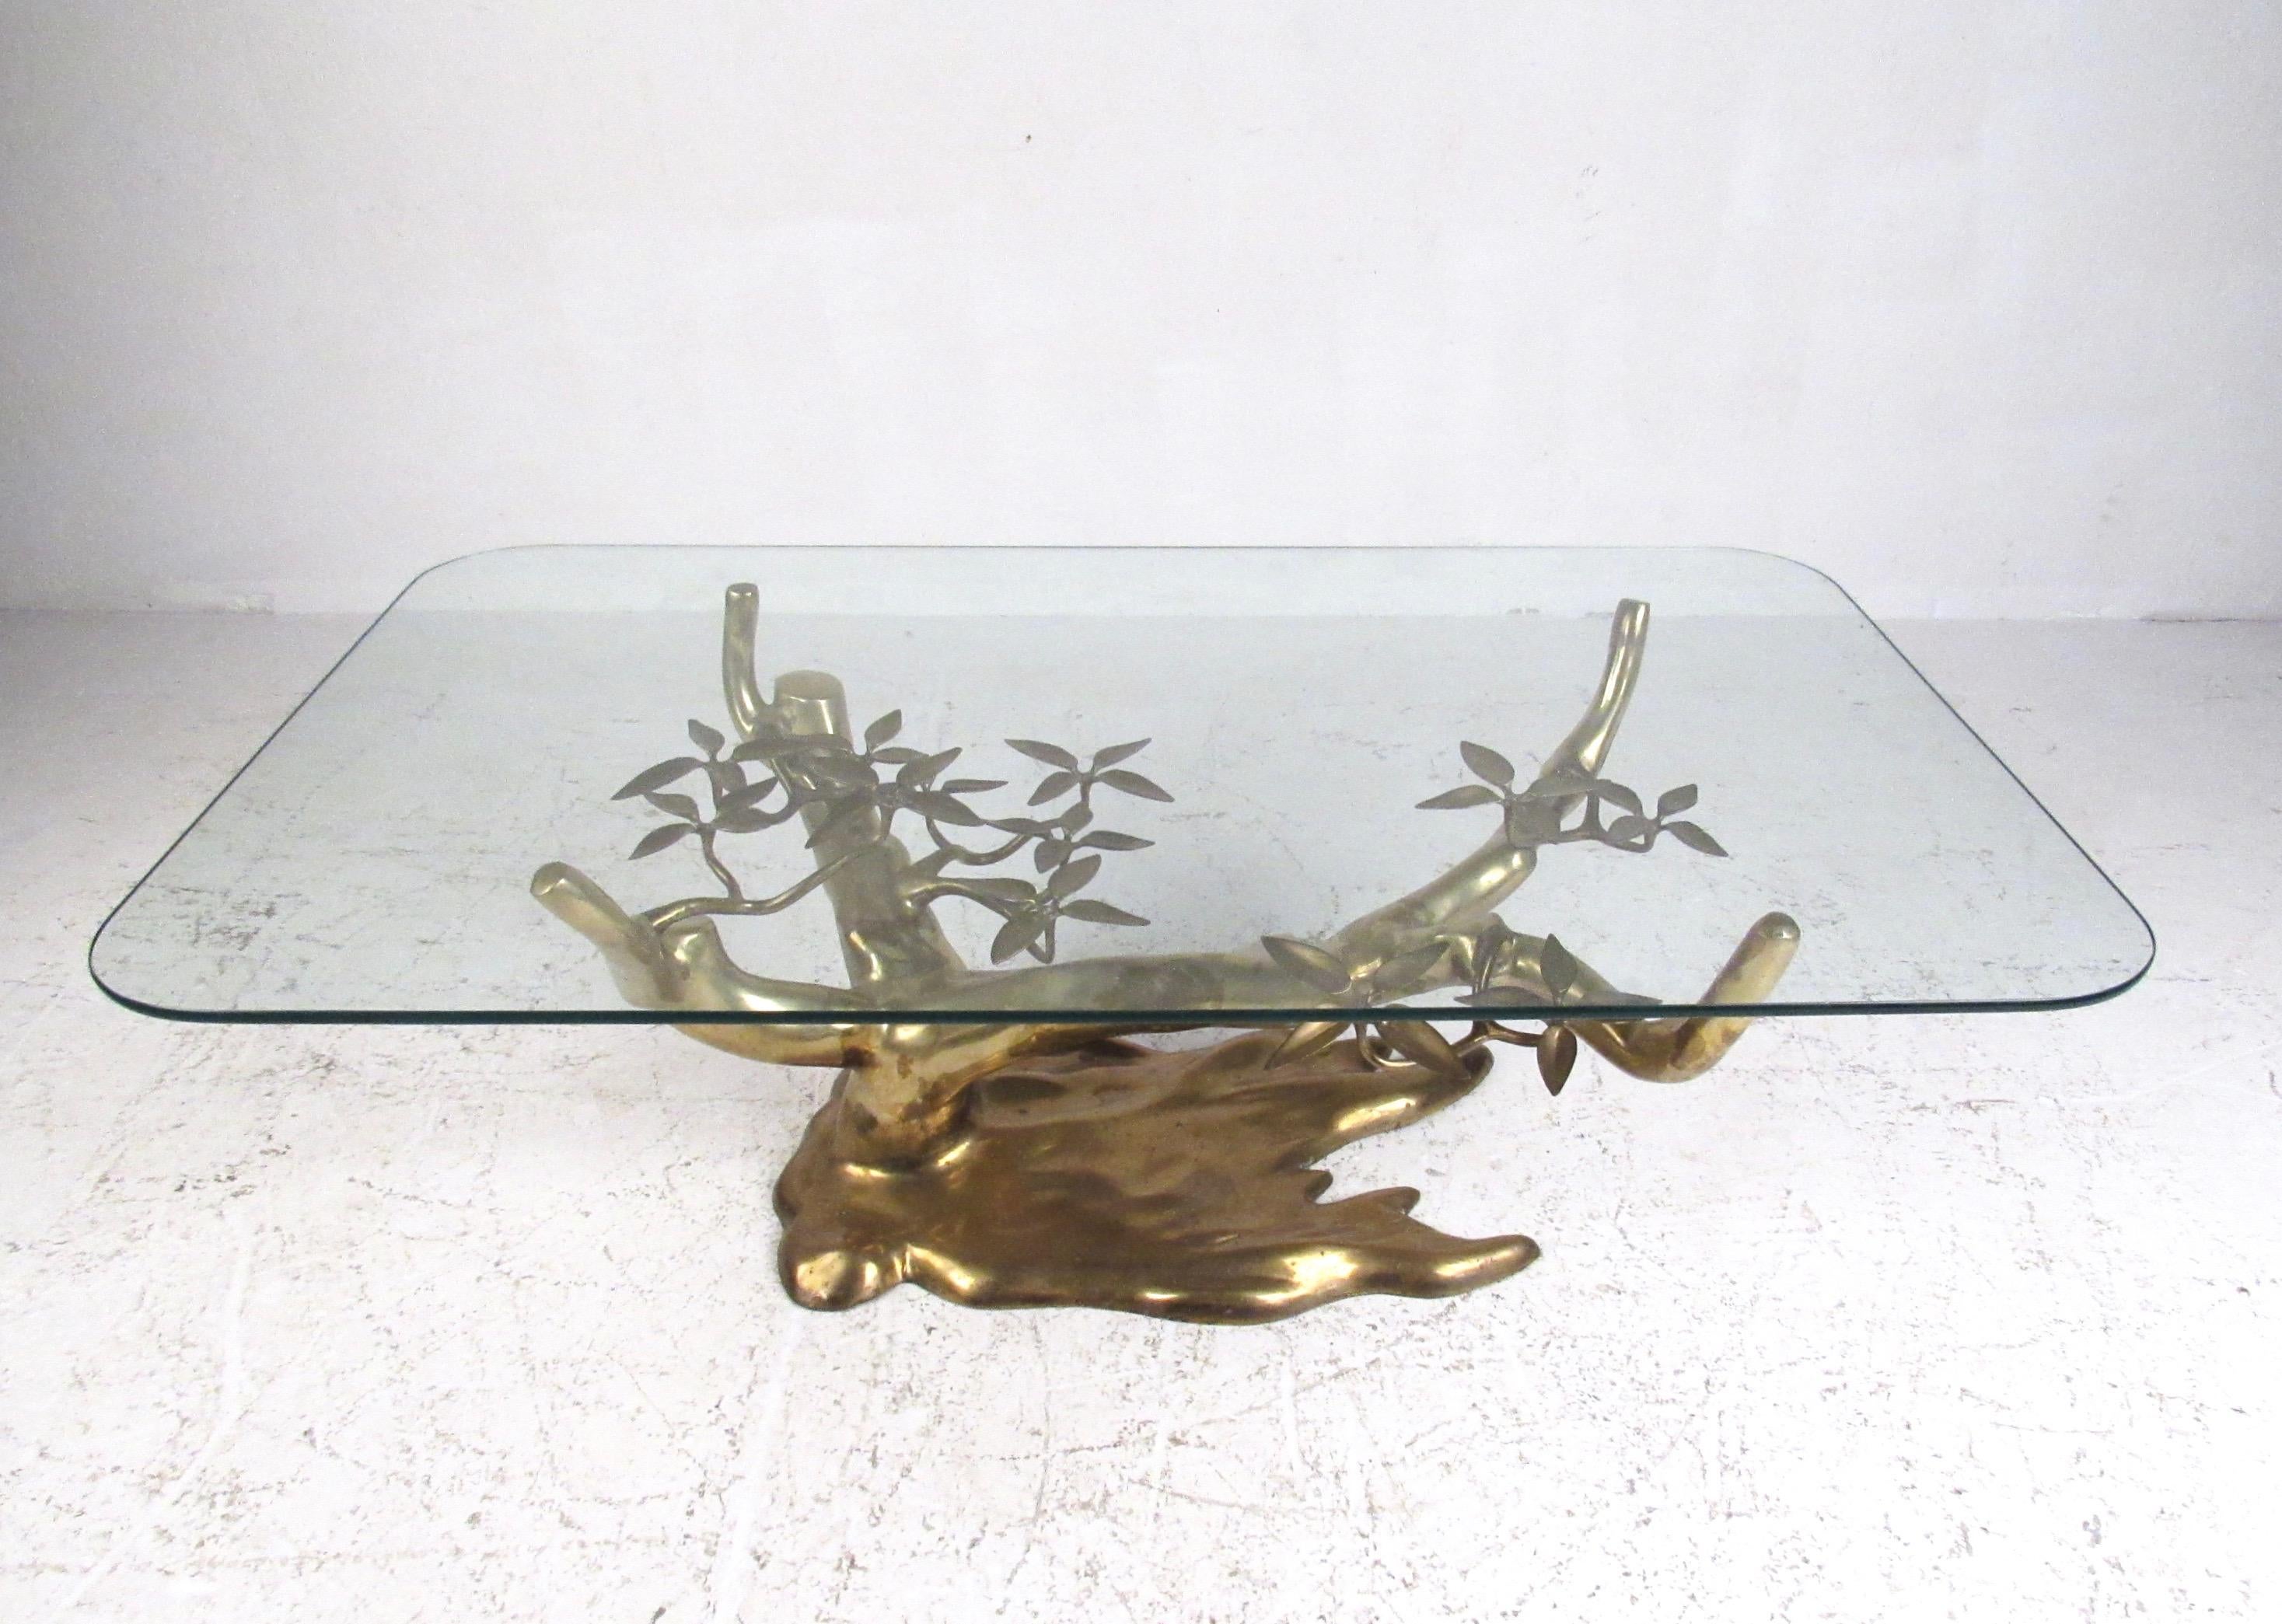 This stunning midcentury cocktail table features a sculptural brass 